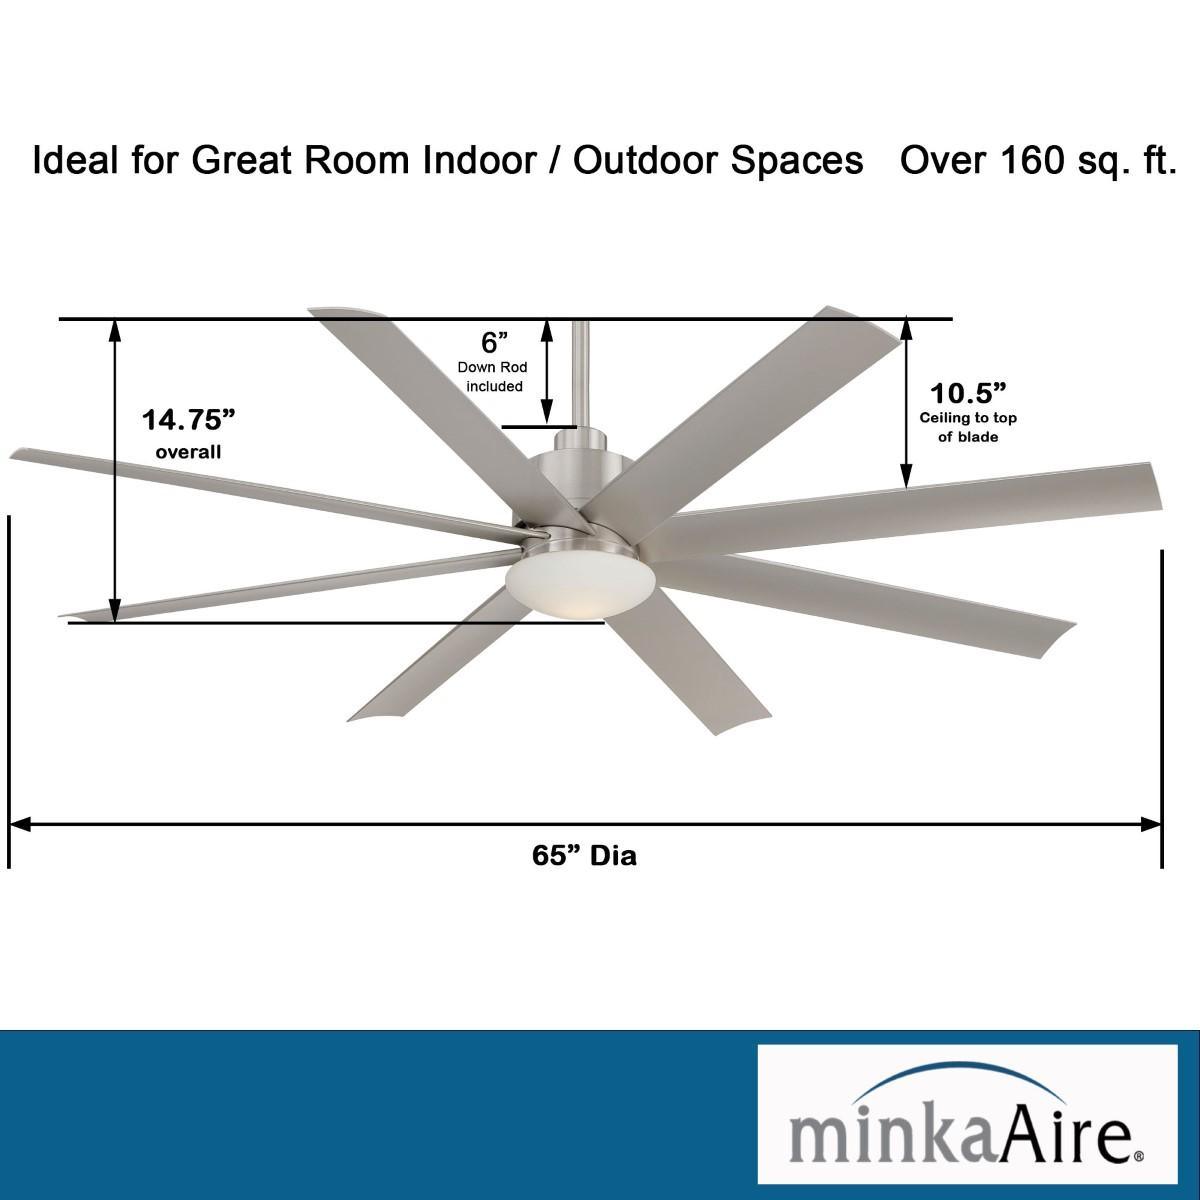 Slipstream 65 Inch Modern Windmill Outdoor Ceiling Fan With Light And Remote